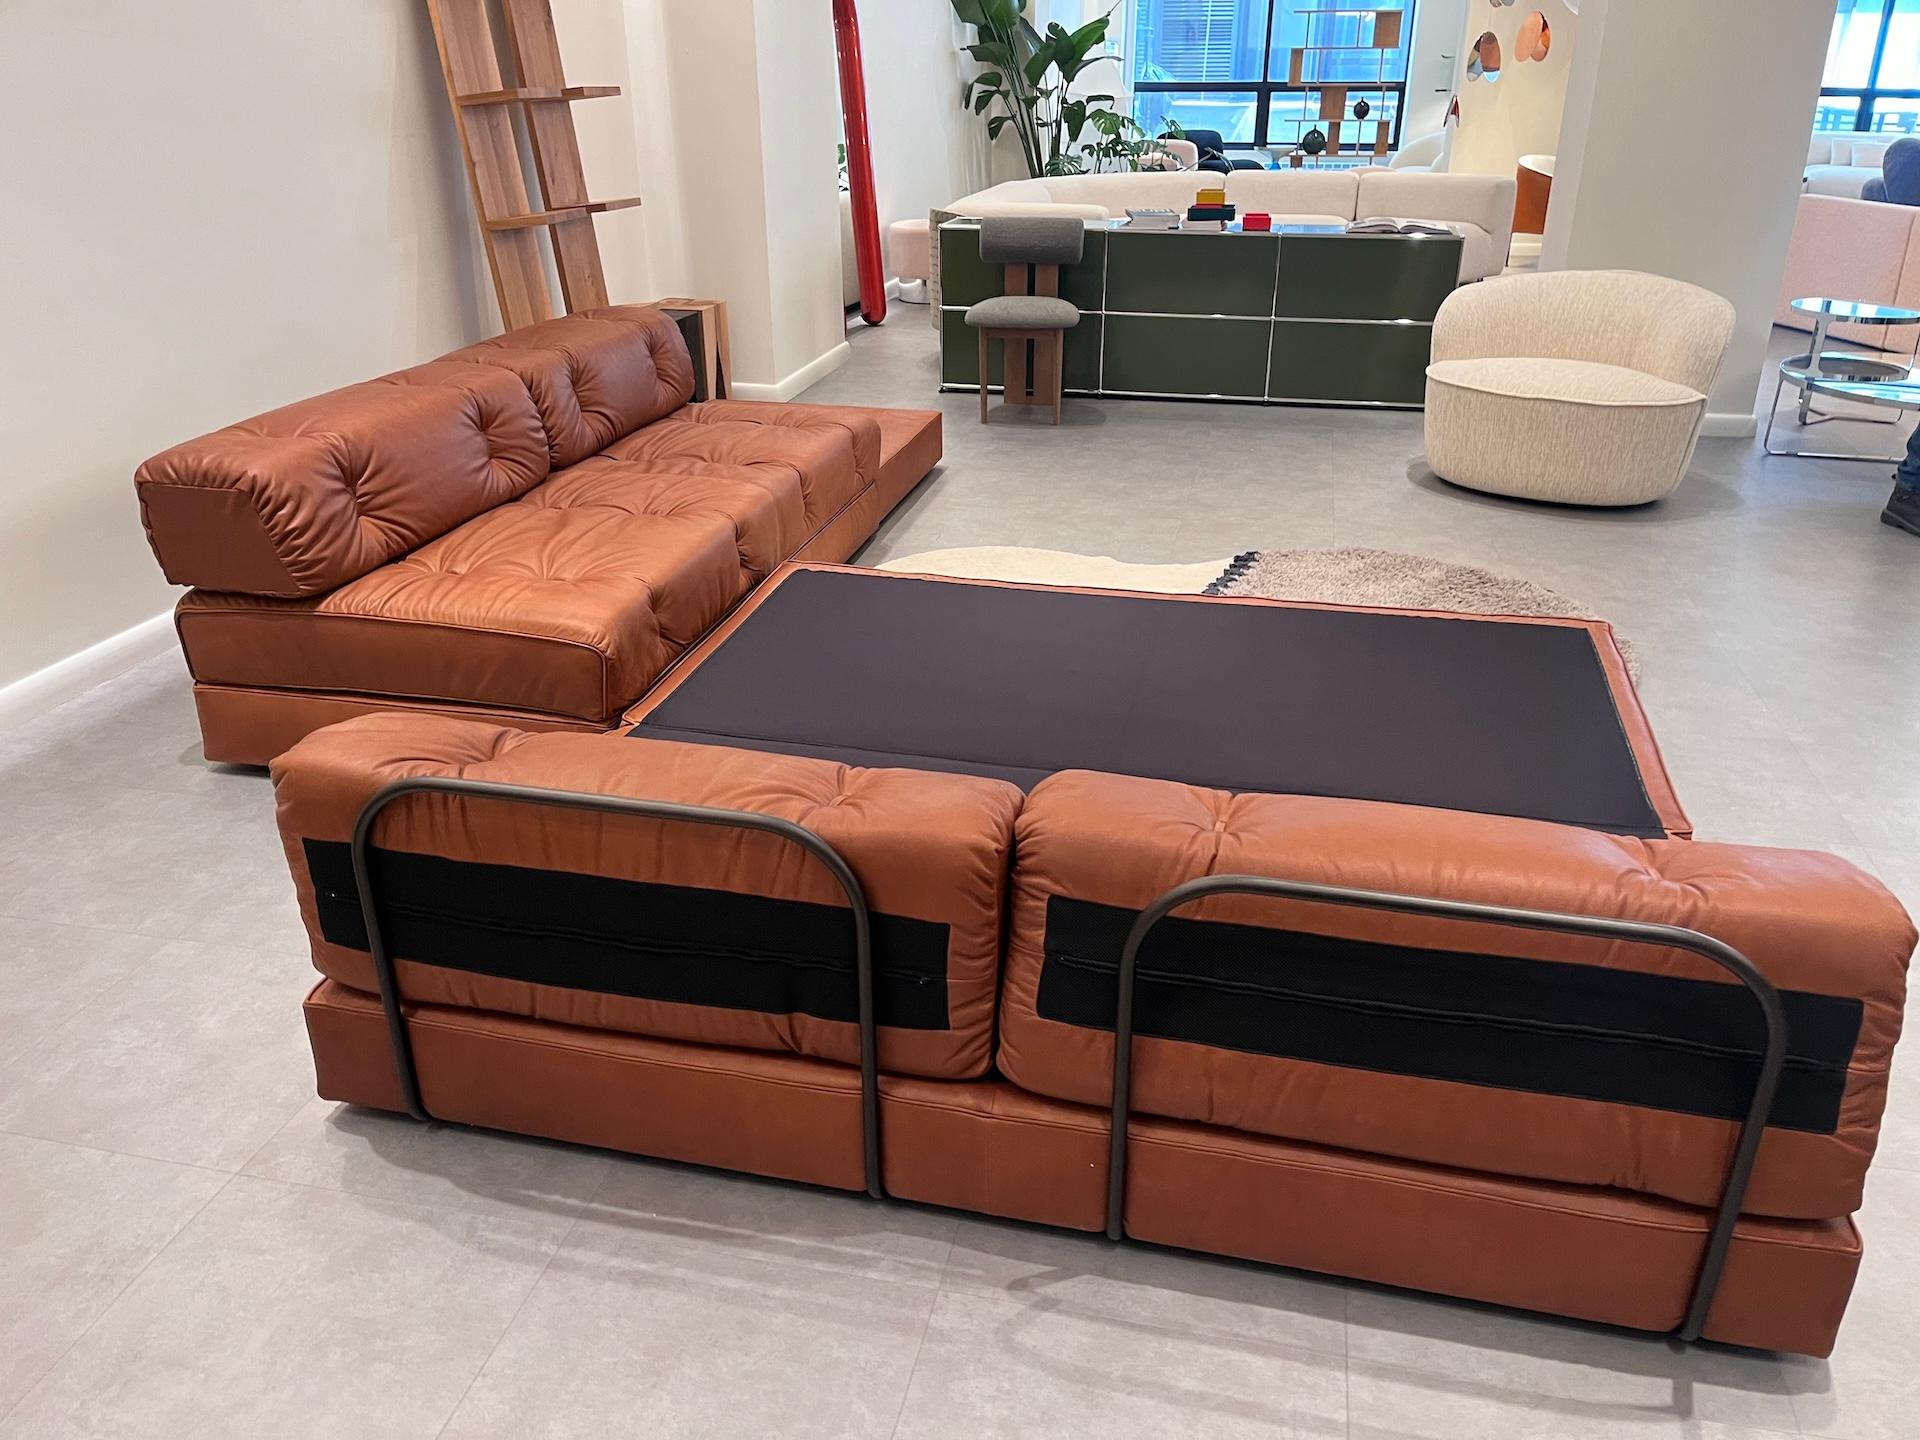 Contemporary Wittmann Leather Atrium Sofa Bed with Tray Element by Wittmann Workshop in STOCK